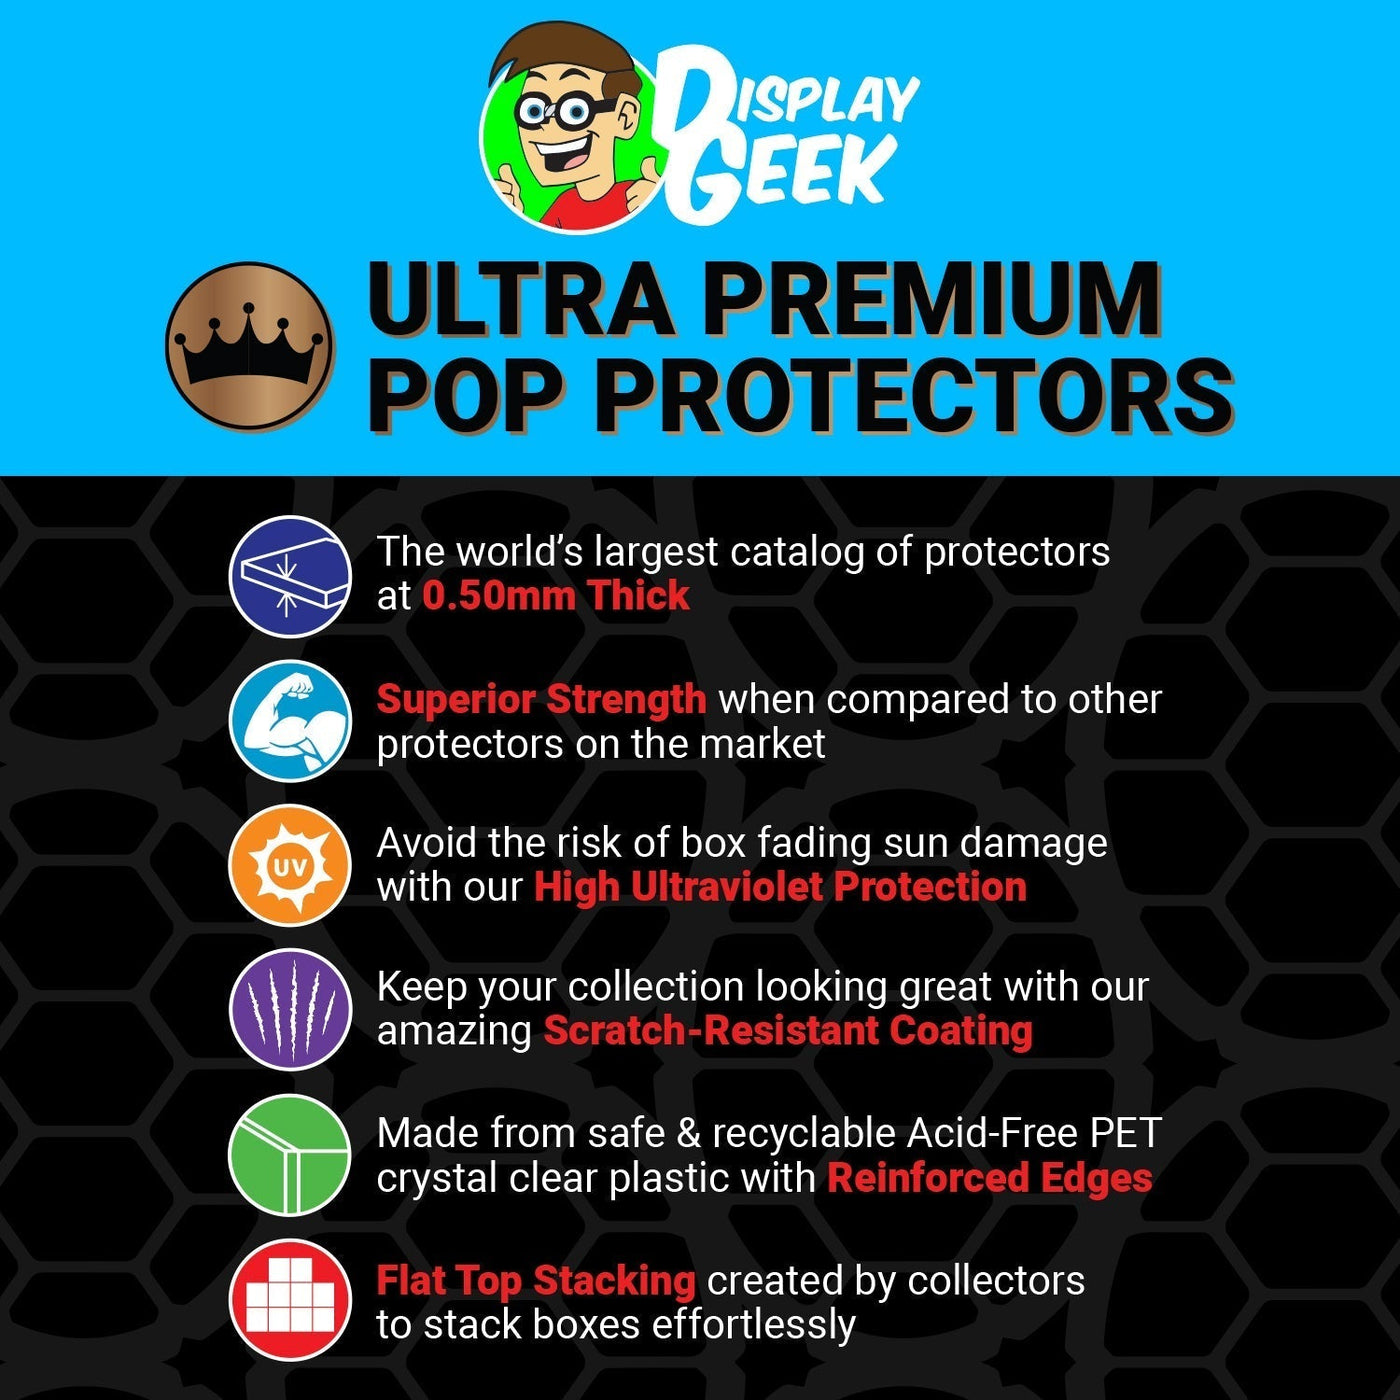 Pop Protector for 2 Pack The Green Hornet & Kato NYCC Funko Pop on The Protector Guide App by Display Geek